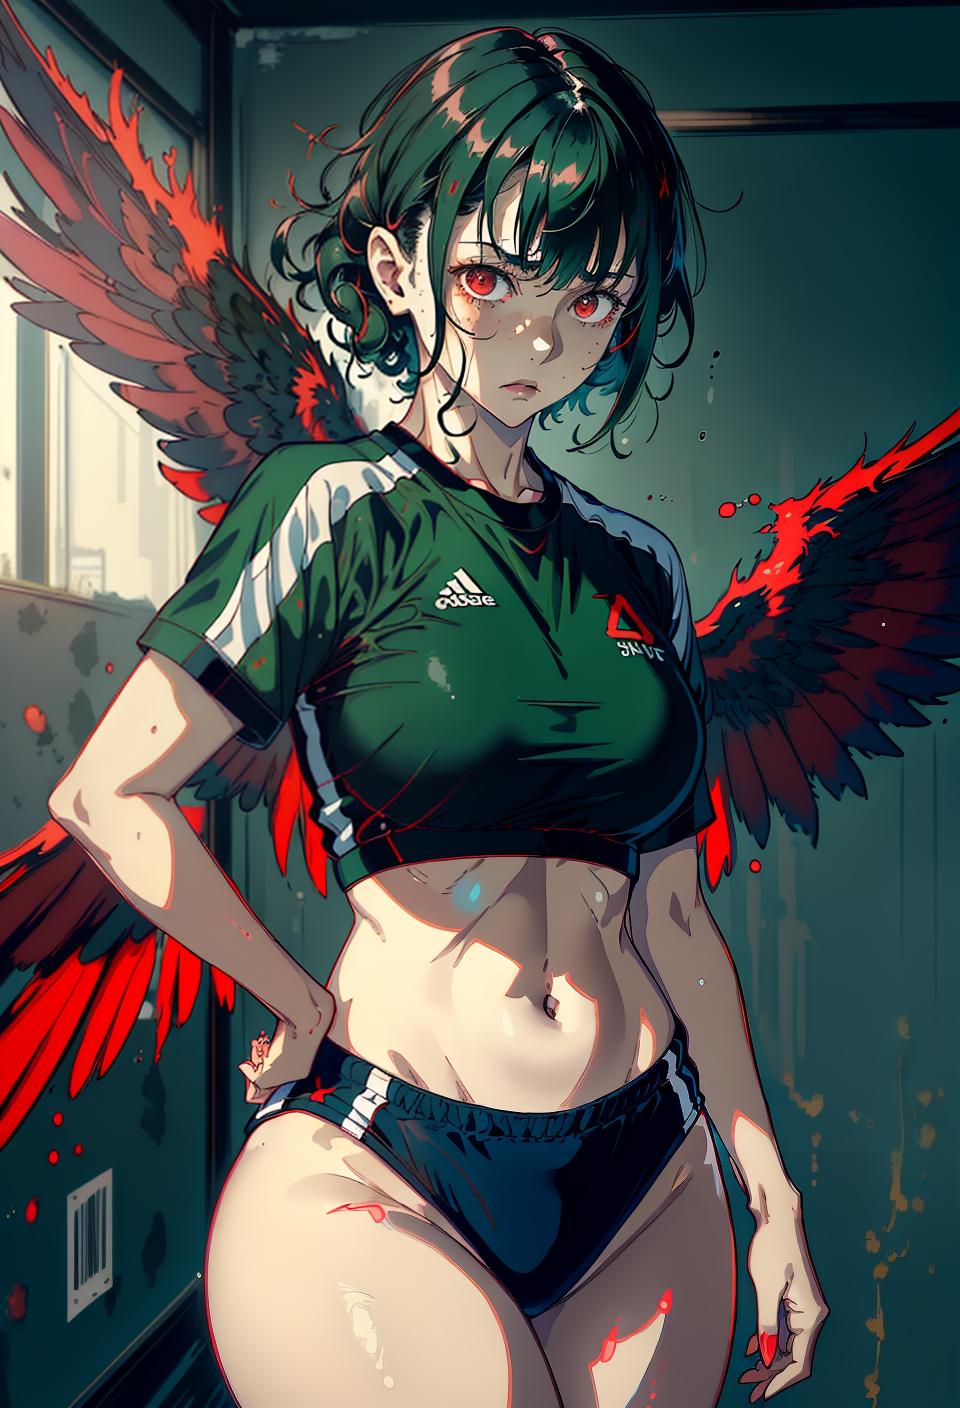  ((trending, highres, masterpiece, cinematic shot)), 1girl, mature, female sportswear, large, abstract background, very short curly dark green hair, blunt bangs, large red eyes, sickly, frail personality, relaxed expression, wings, very pale skin, epic, clever